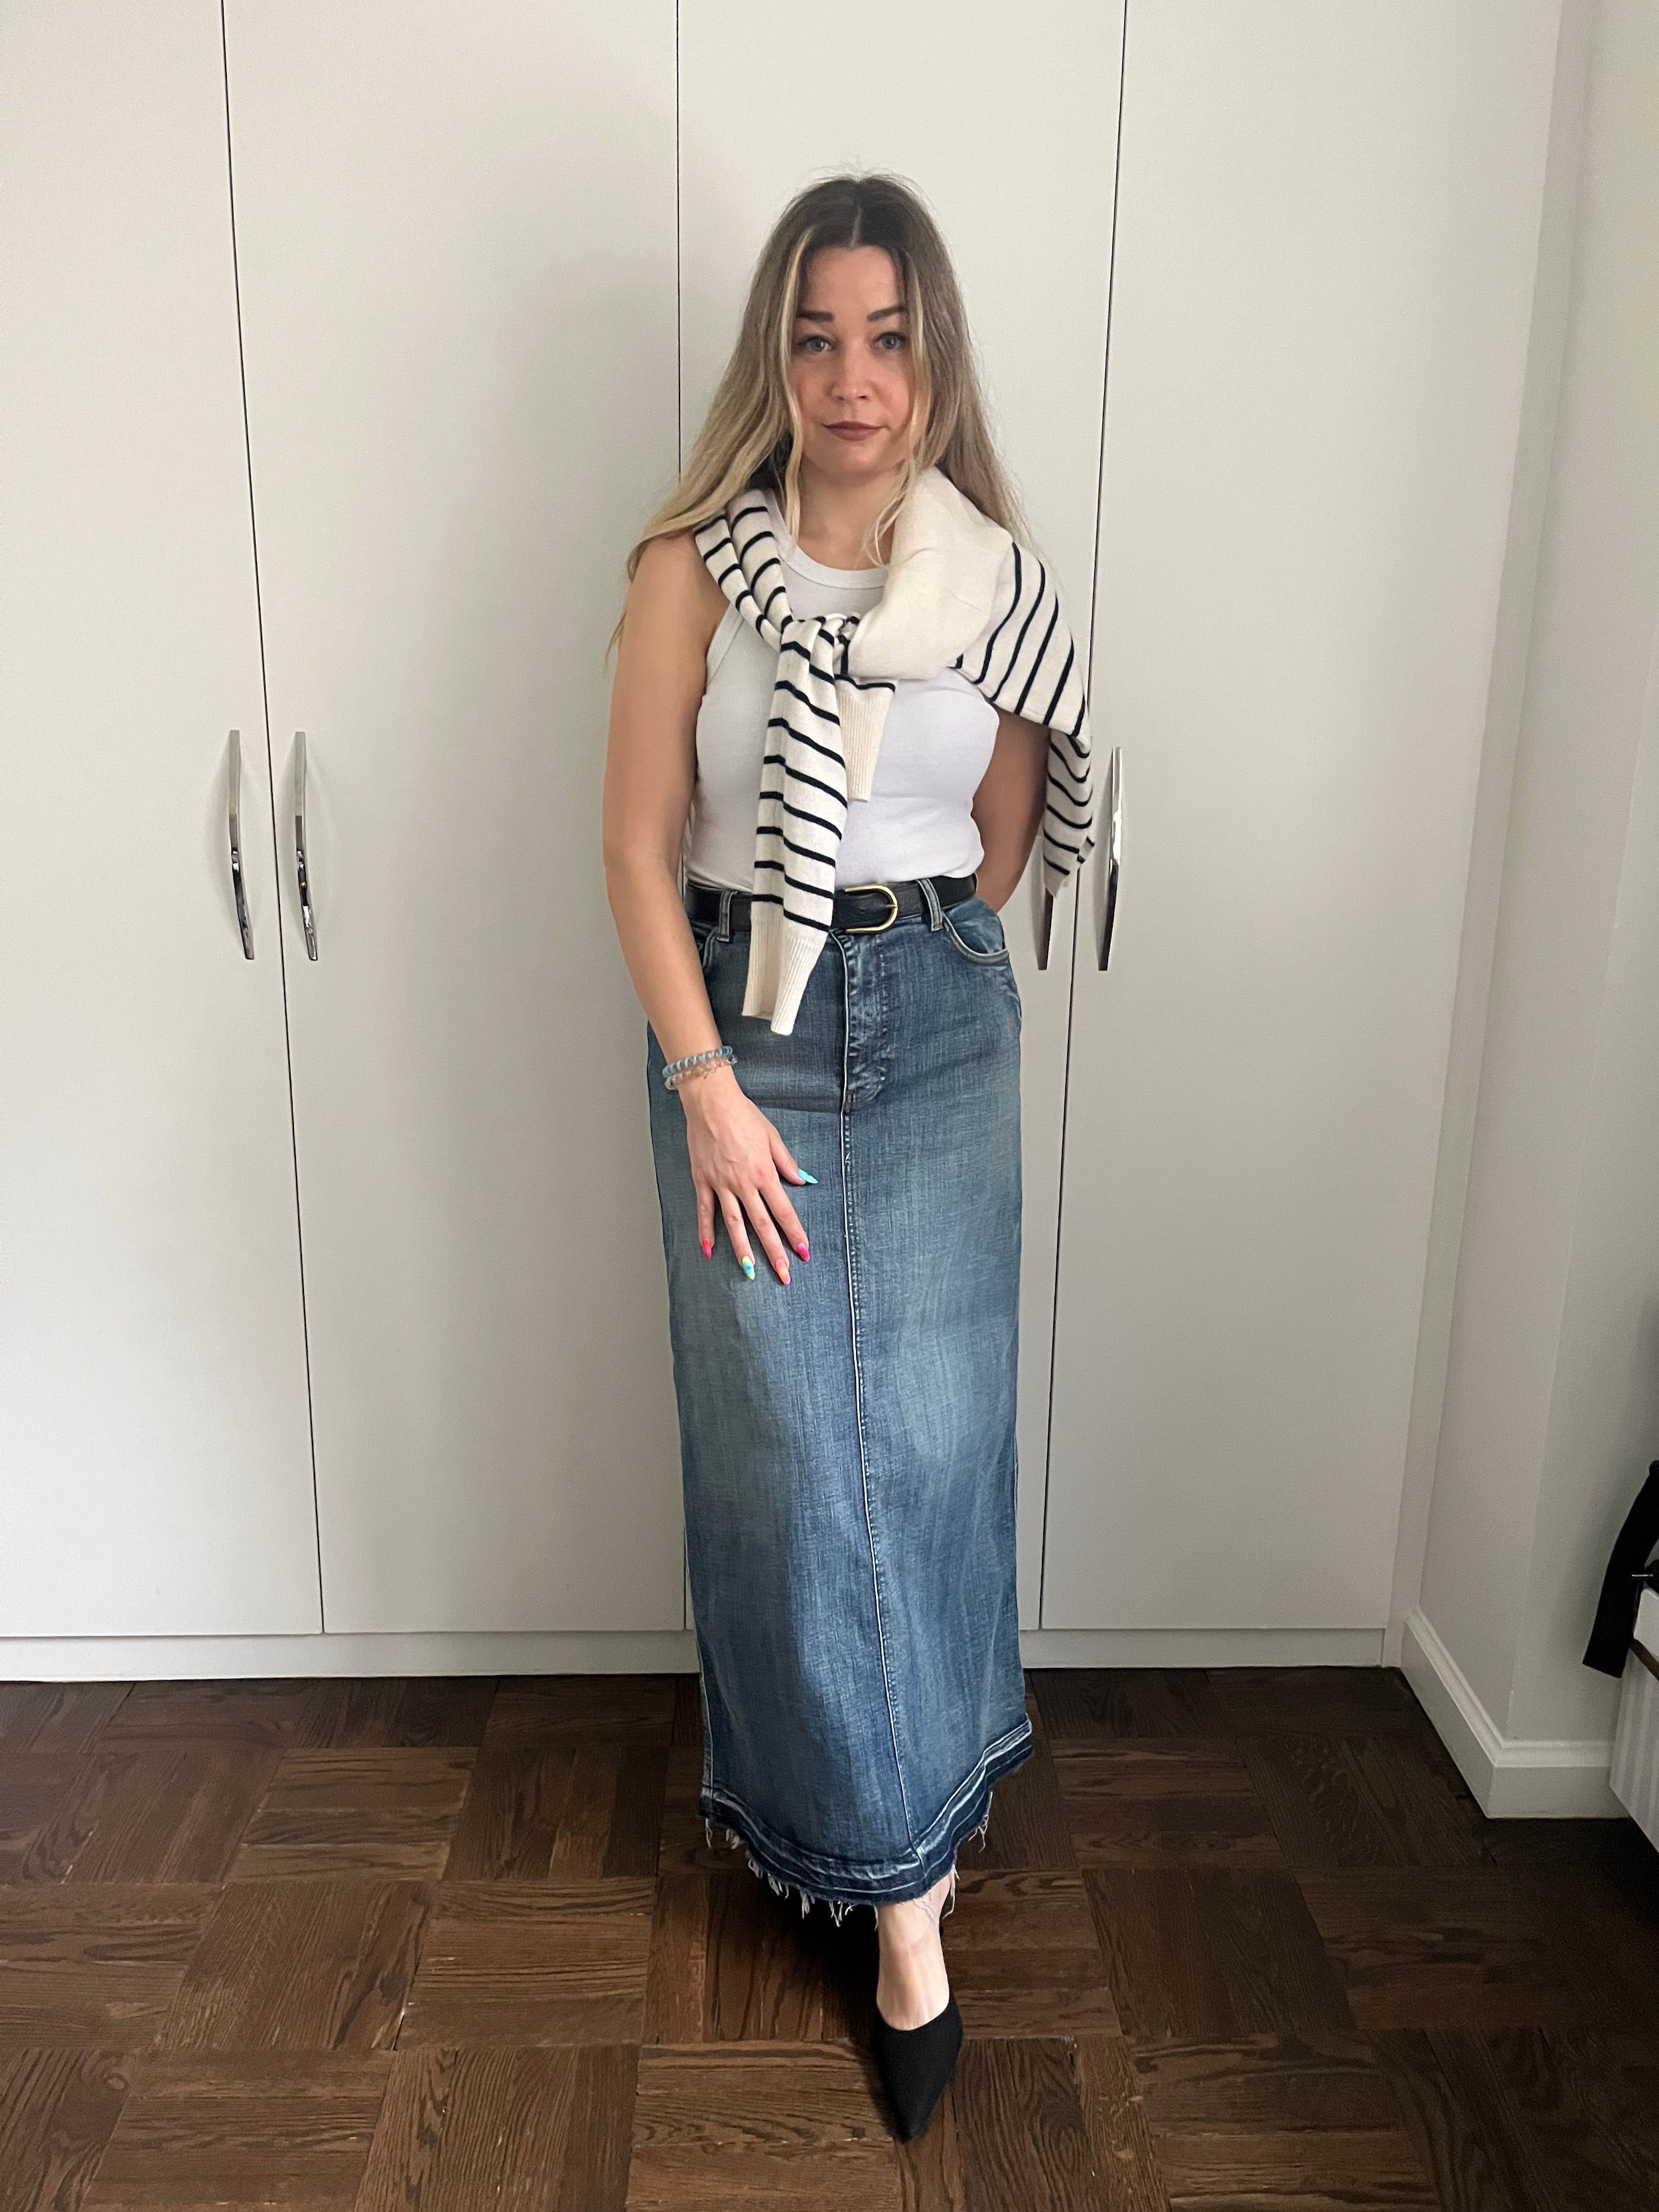 How to Wear a Denim Skirt in Summer - Closetful of Clothes